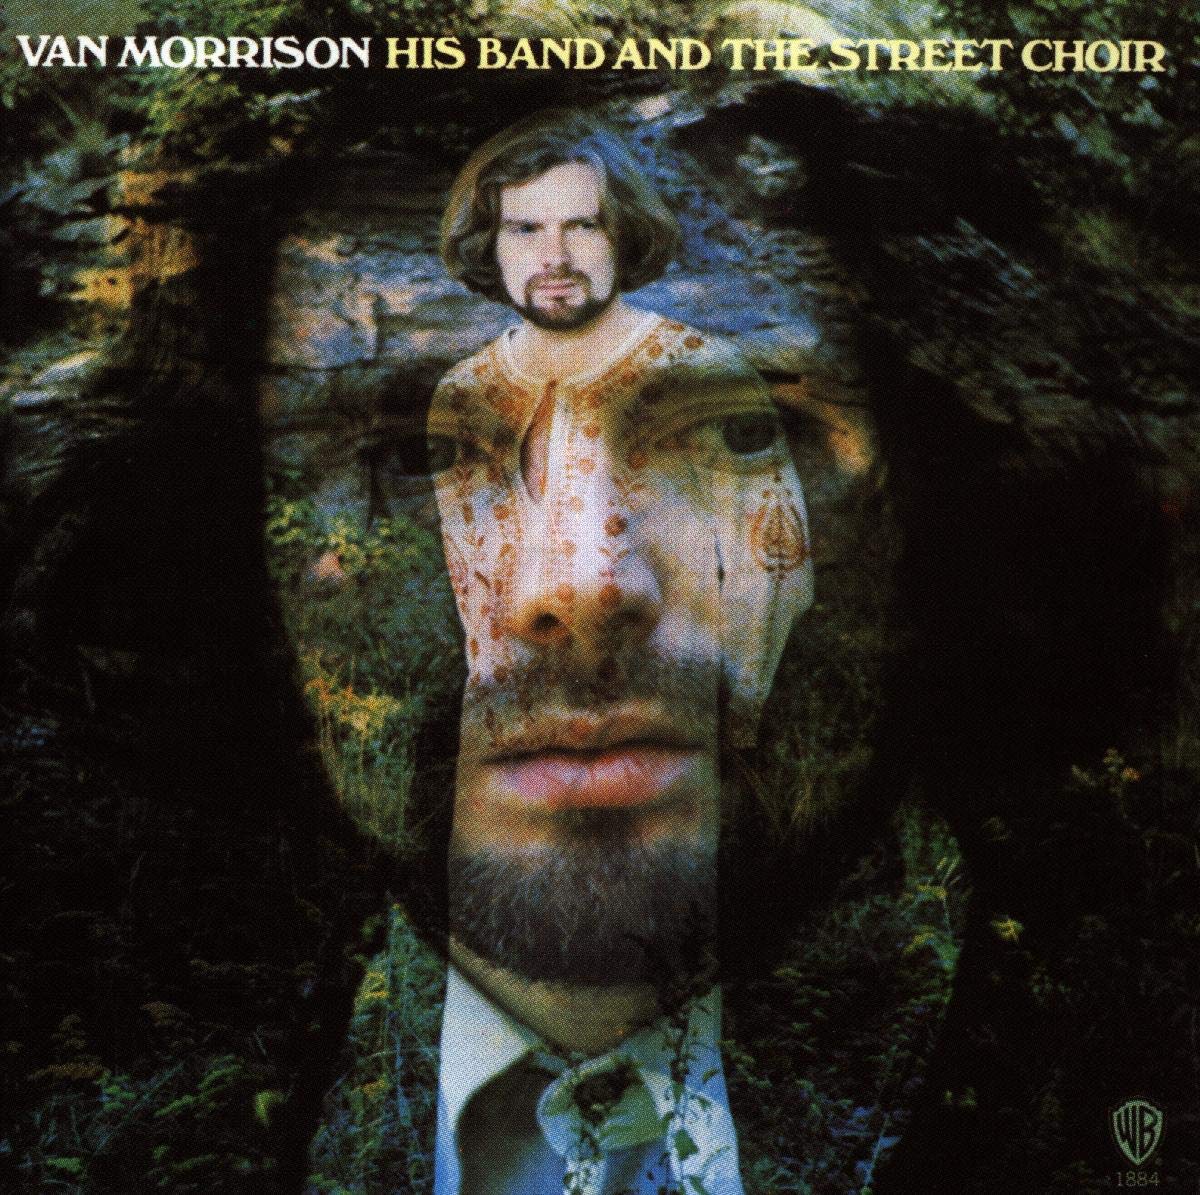 Morrison, Van - His Band and the Street Choir (Turquoise Vinyl)